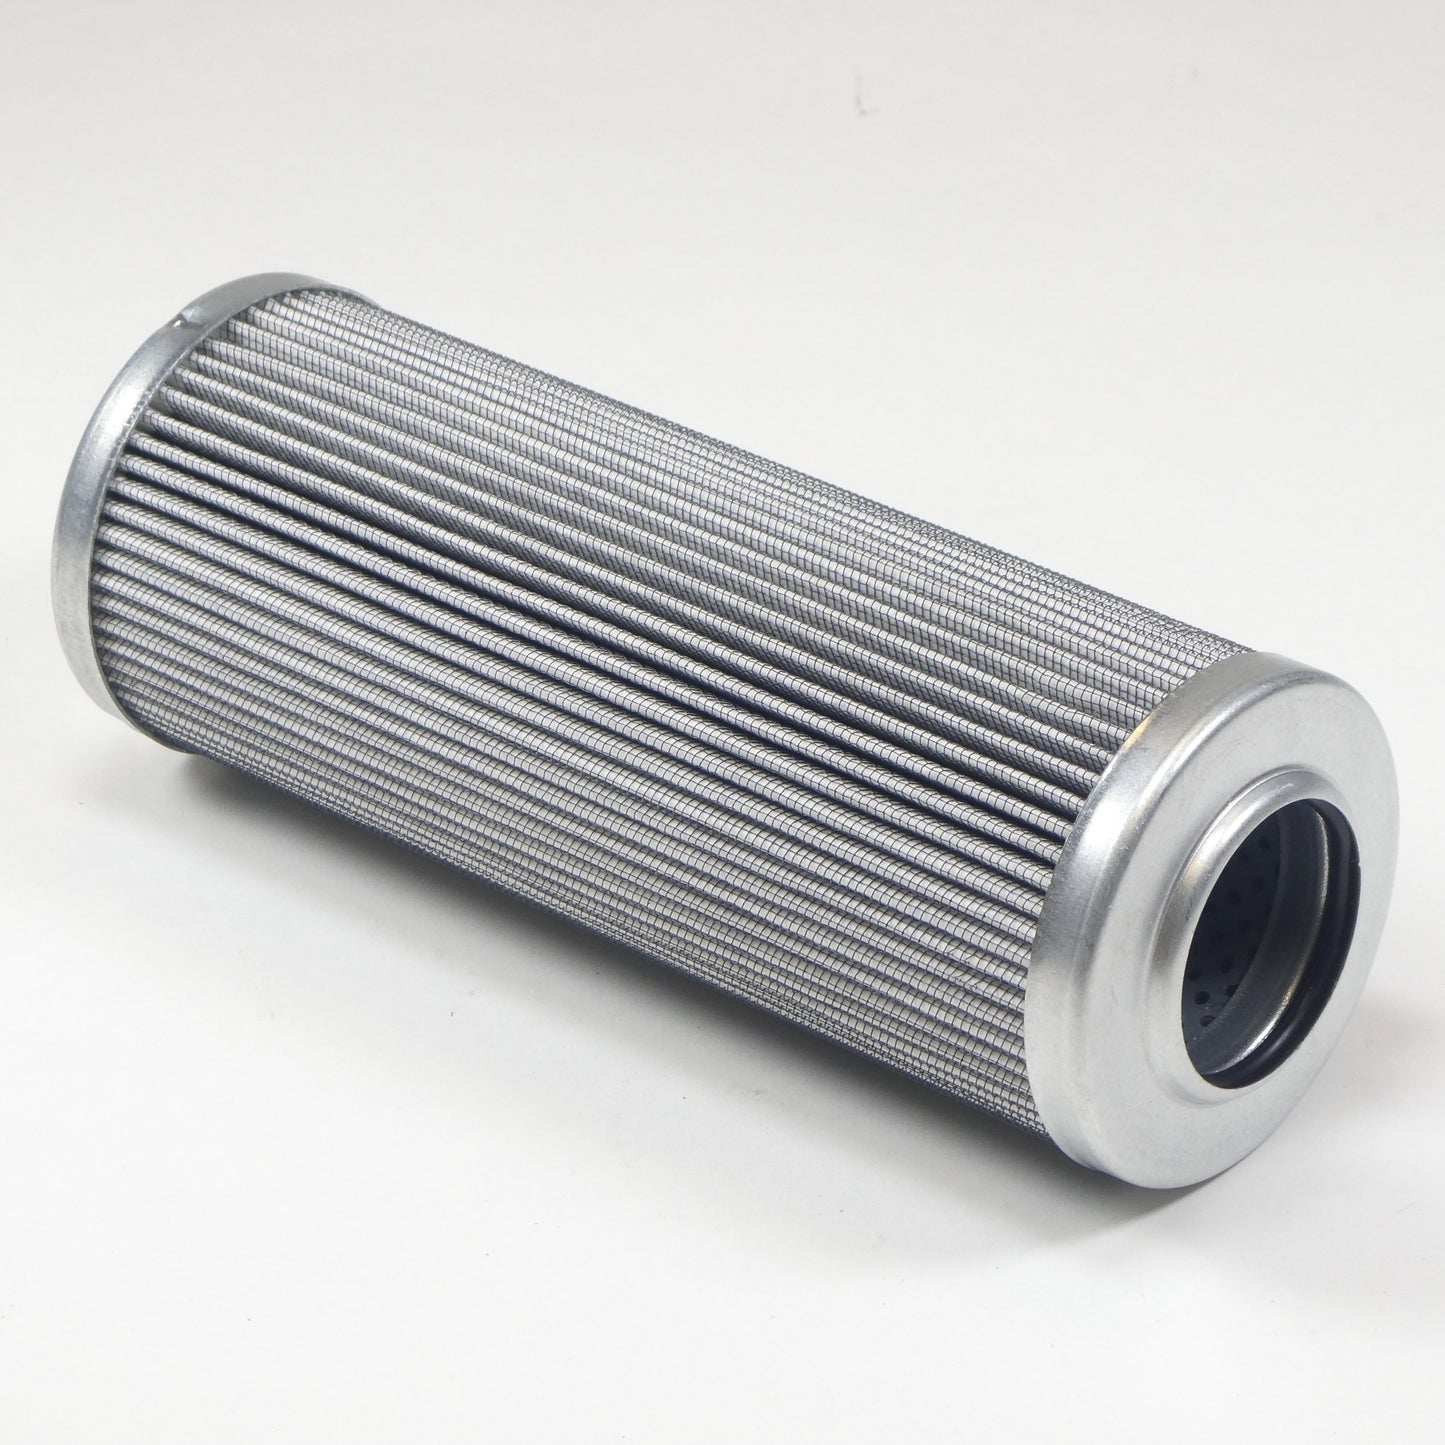 Hydrafil Replacement Filter Element for Sofima CH802MCV1